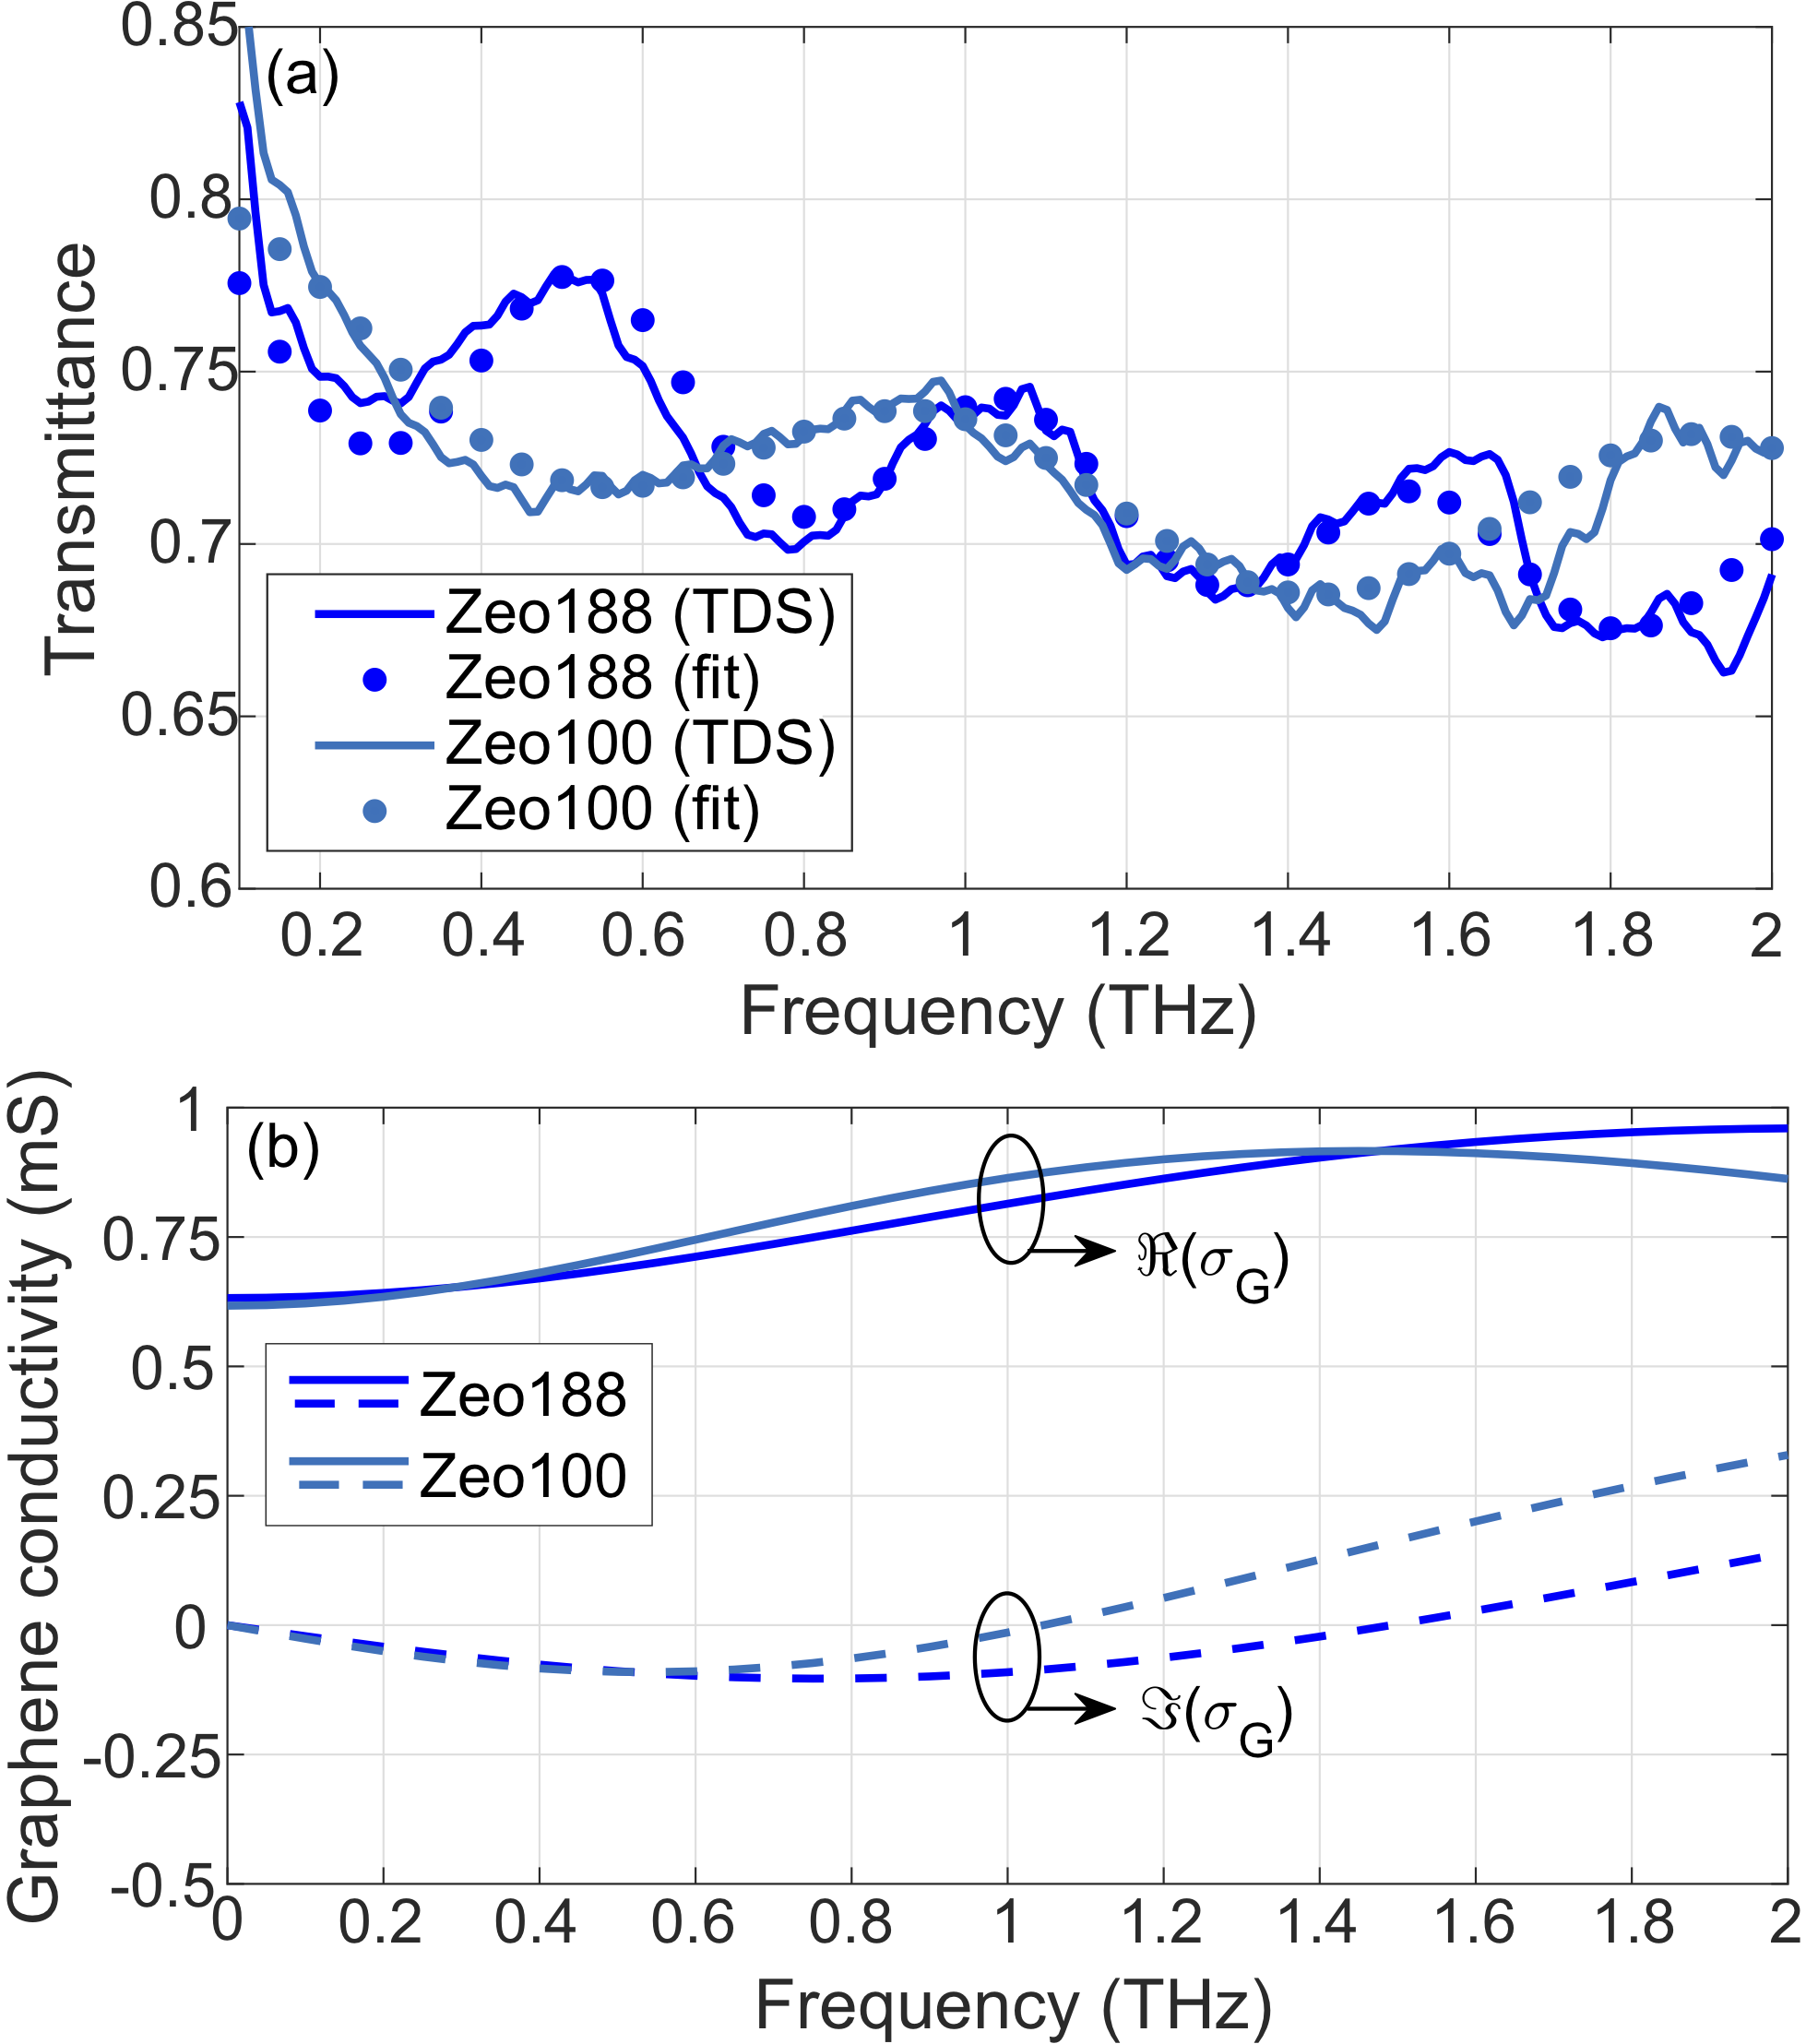 Measurements of graphene conductivity in the THz band